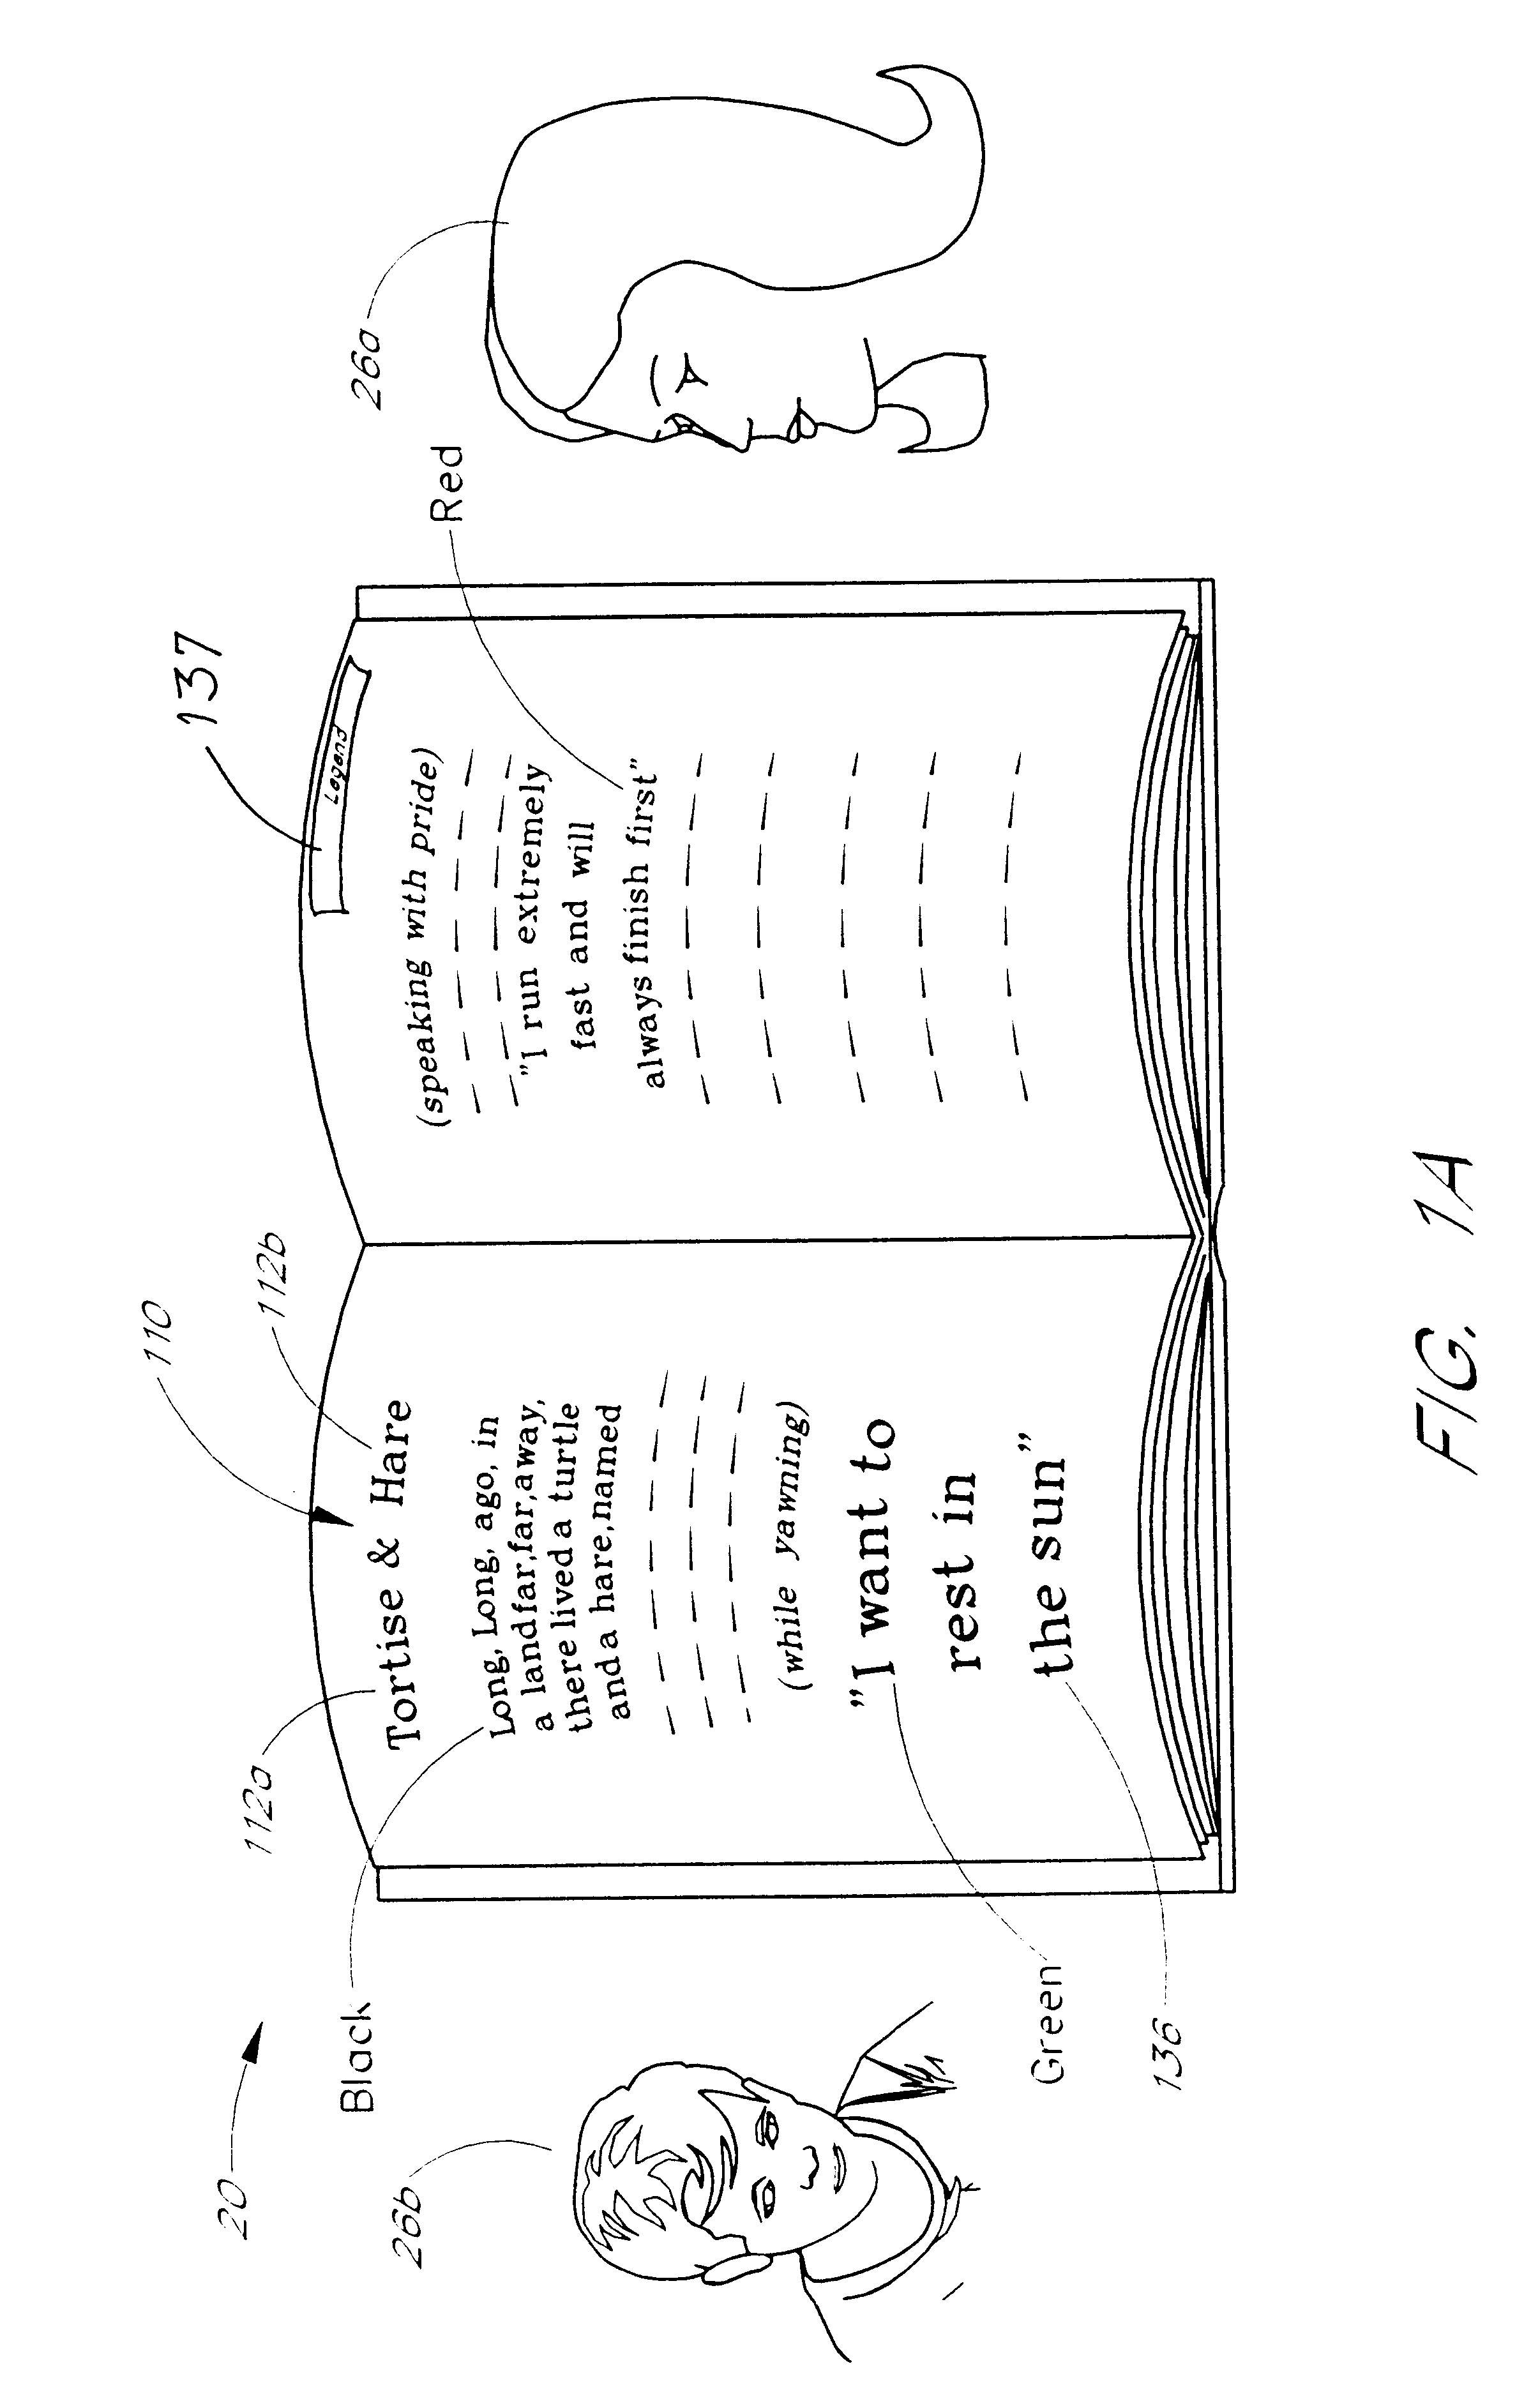 Method and apparatus for preparing customized reading material